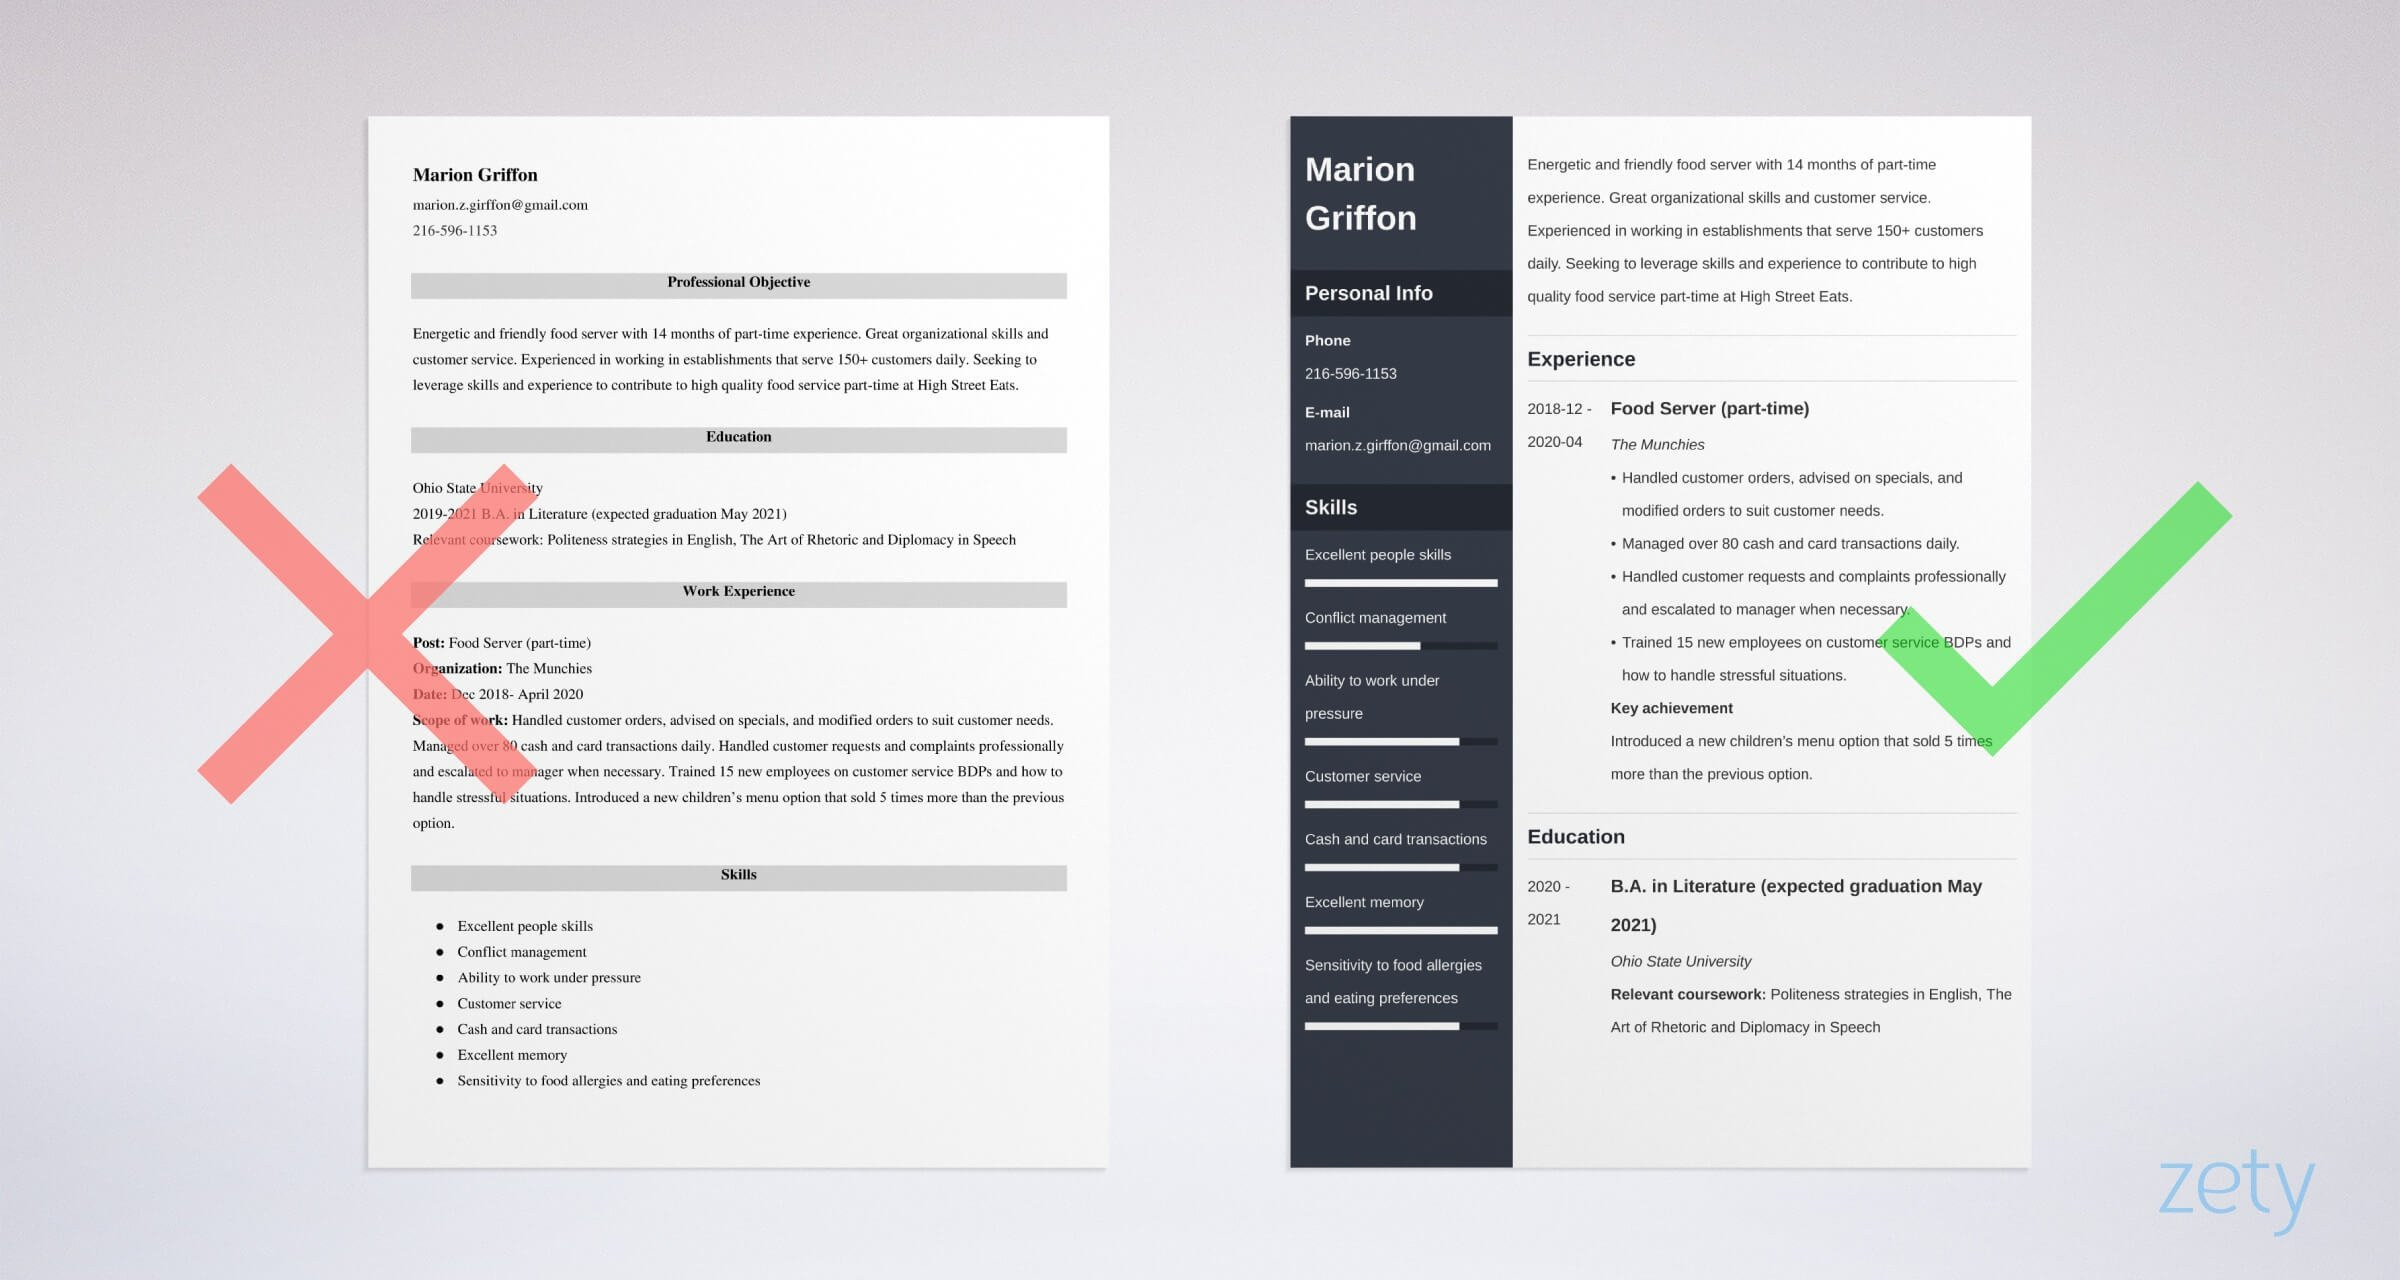 First Part Time Job Resume Sample Resume for A Part-time Job: Template and How to Write